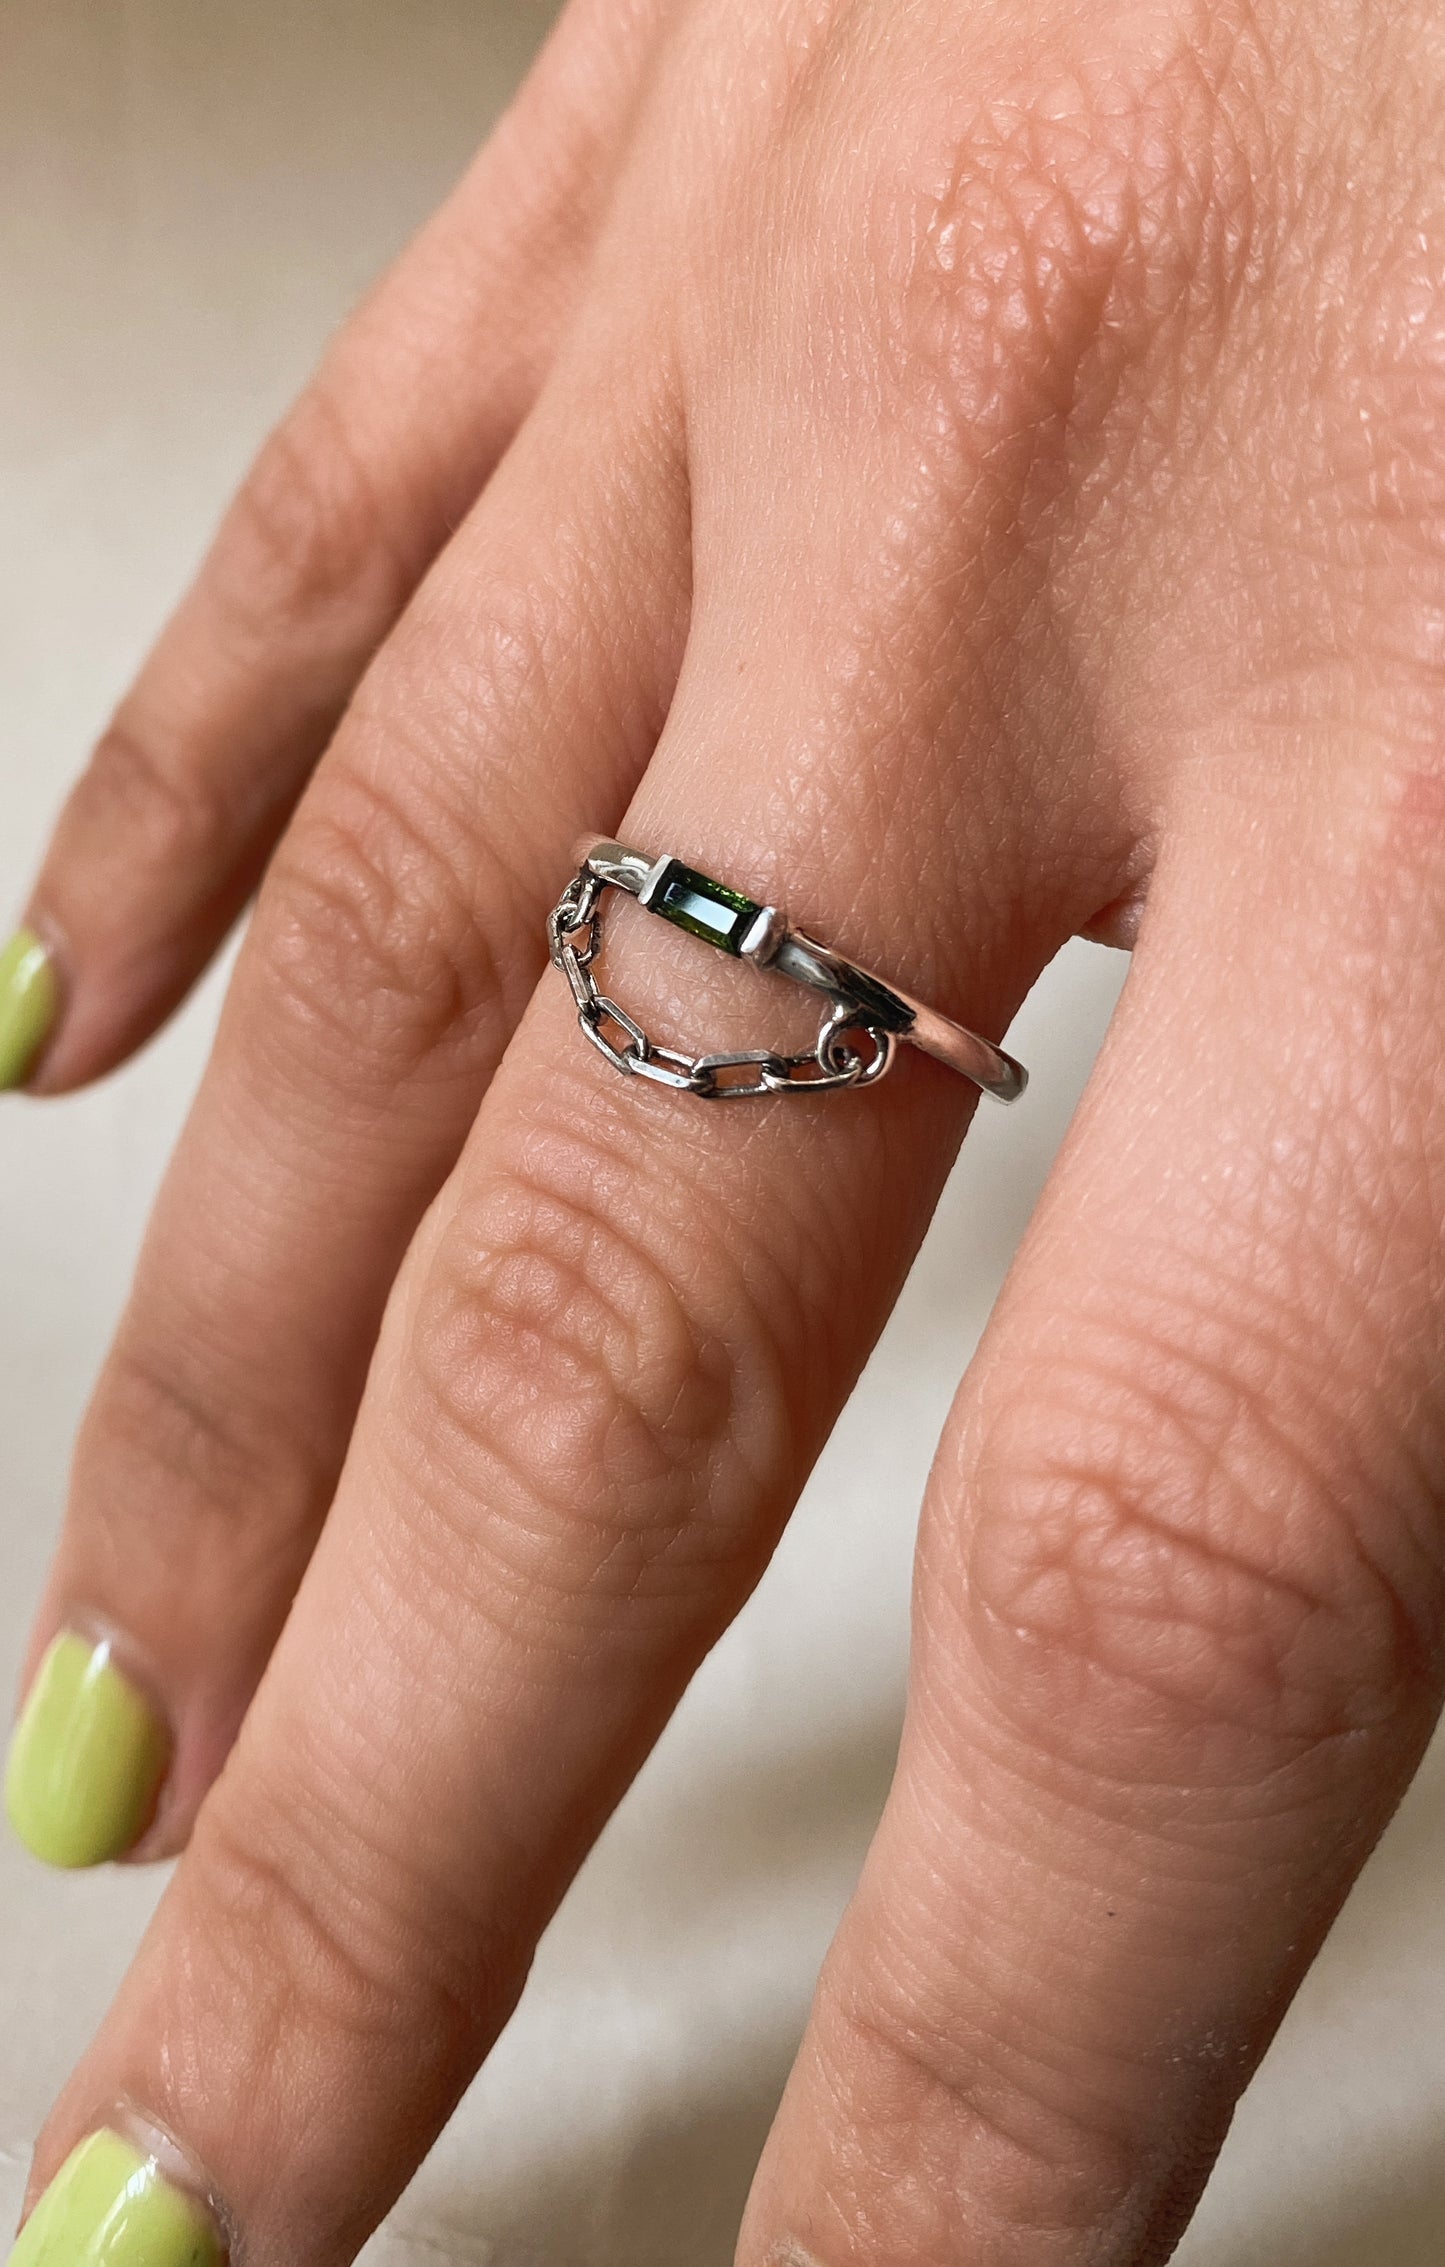 Chain Keep Us Together Ring OOAK Tourmaline Baguette Cut